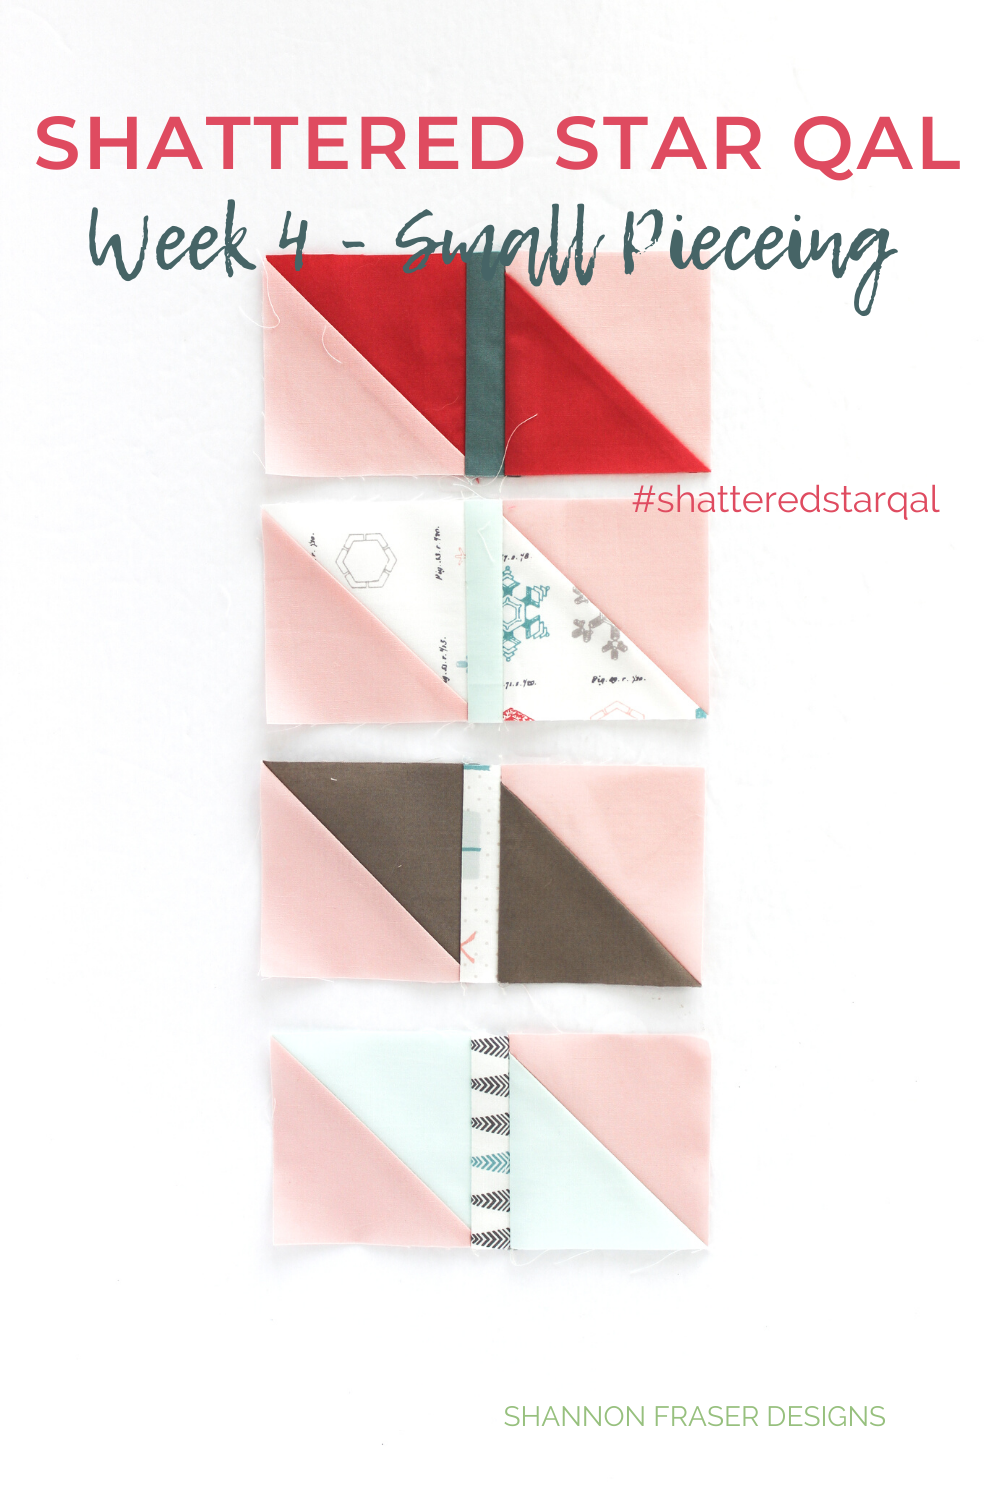 Half square triangle units for the Shattered Star quilt blocks | Shattered Star quilt along Week 4 - Small Piecing tips | Shannon Fraser Designs #halfsquaretriangles